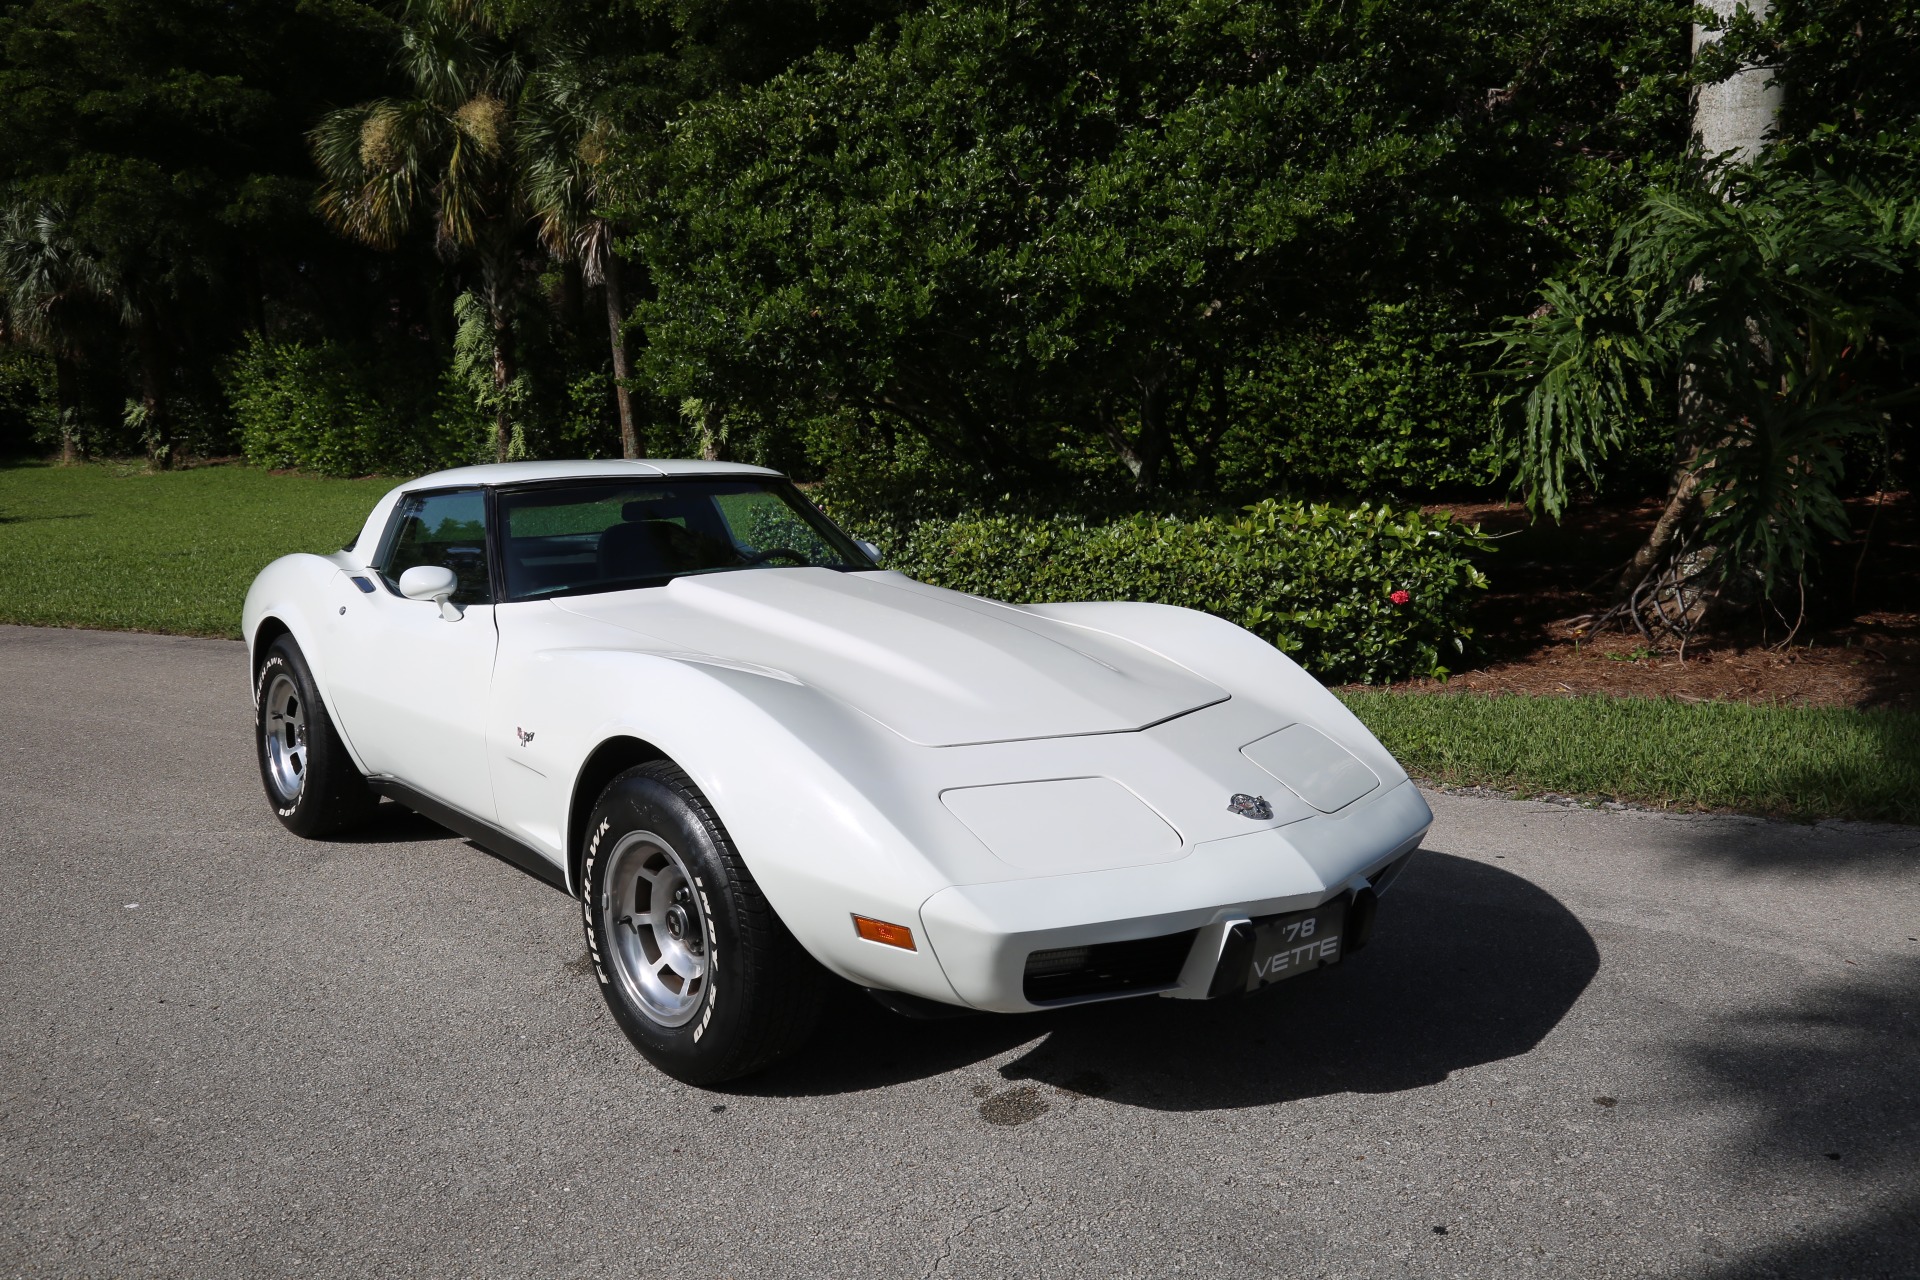 Used 1978 Chevrolet Corvette Anniversary Edition for sale $18,000 at Muscle Cars for Sale Inc. in Fort Myers FL 33912 7